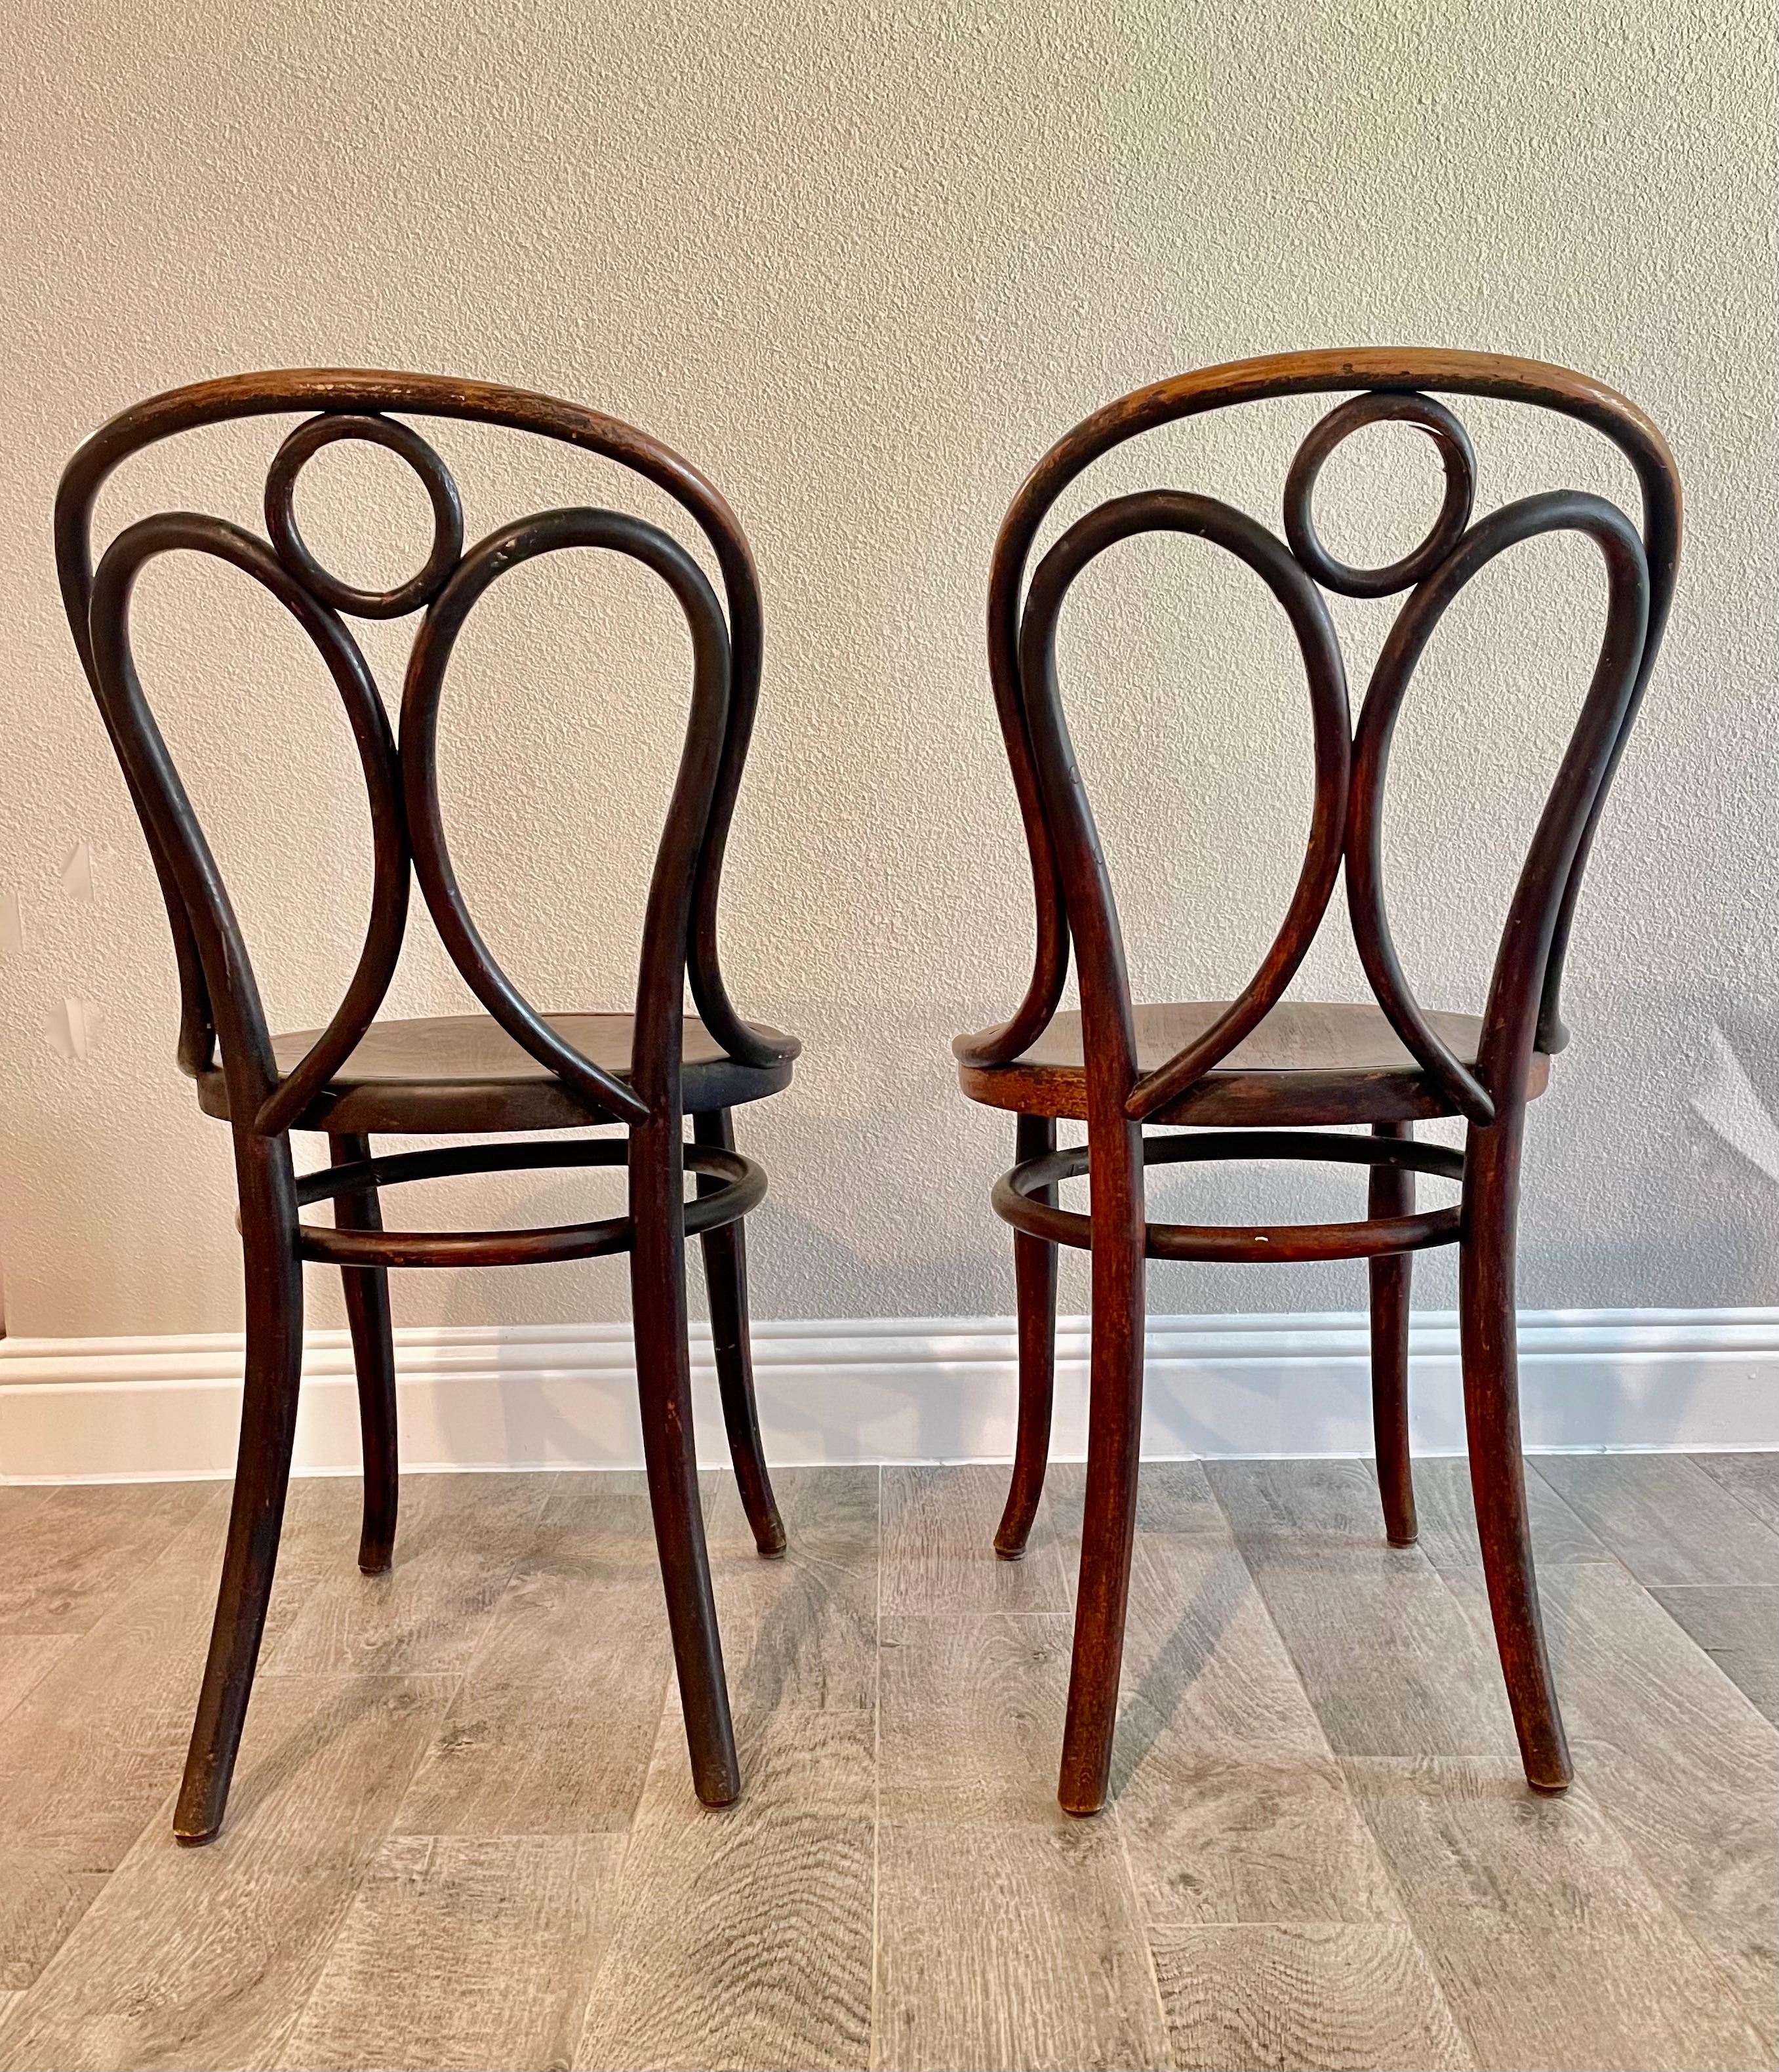 A pair of Thonet Bentwood chairs side chairs/ Bistro chairs. These are very fragile but would look great in an entry way or reading corner. Original label still attached.